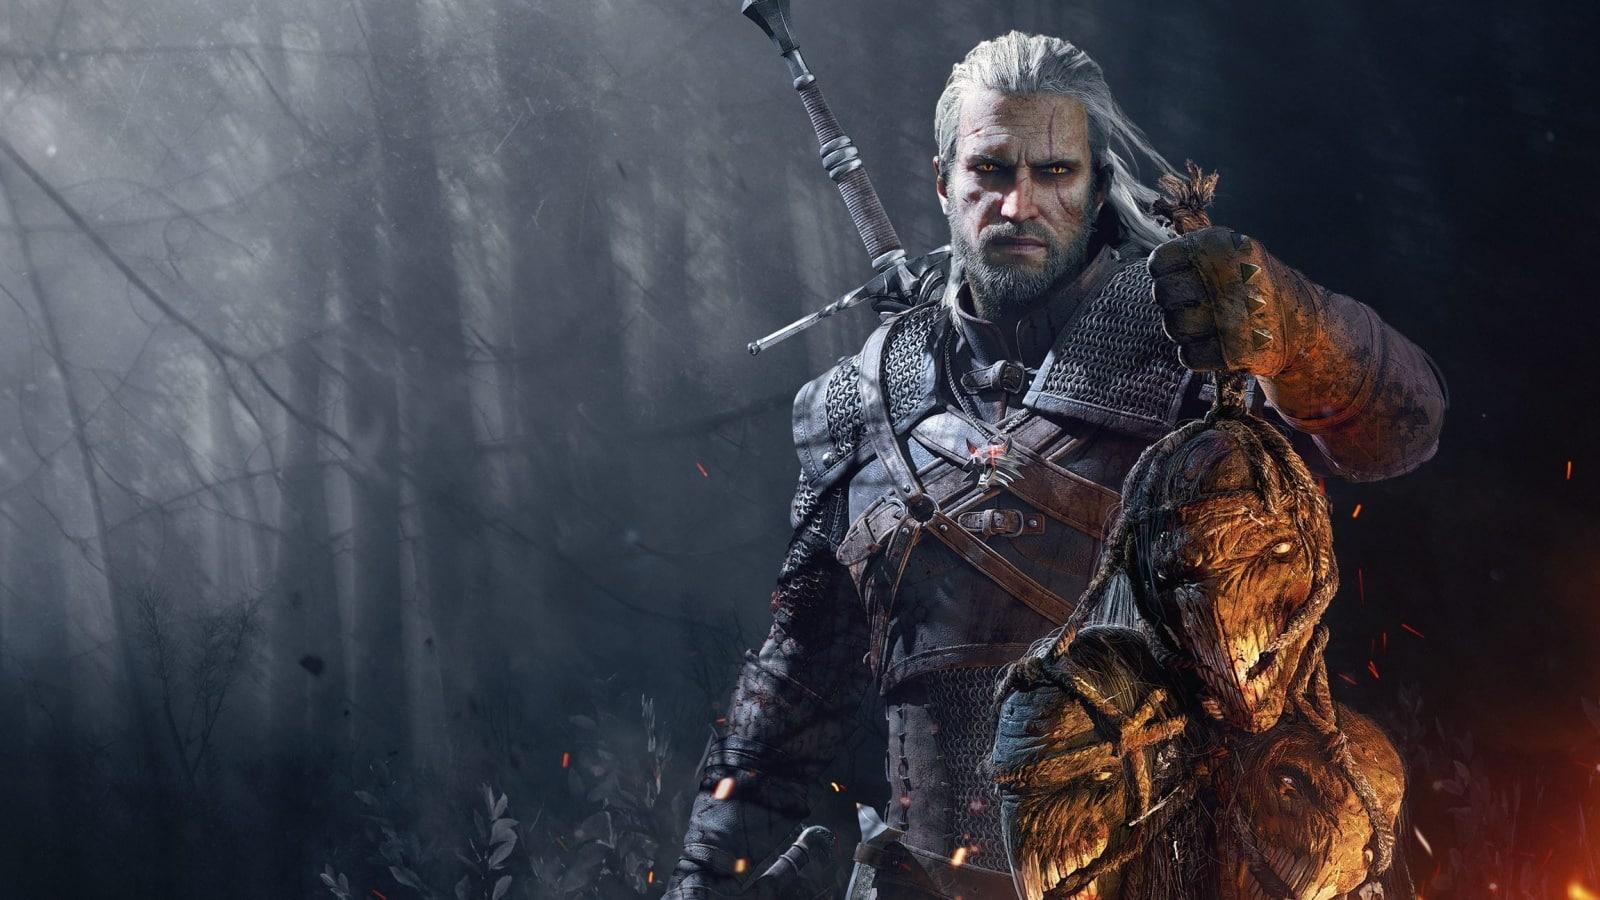 witcher multiplayer game hinted in job listing